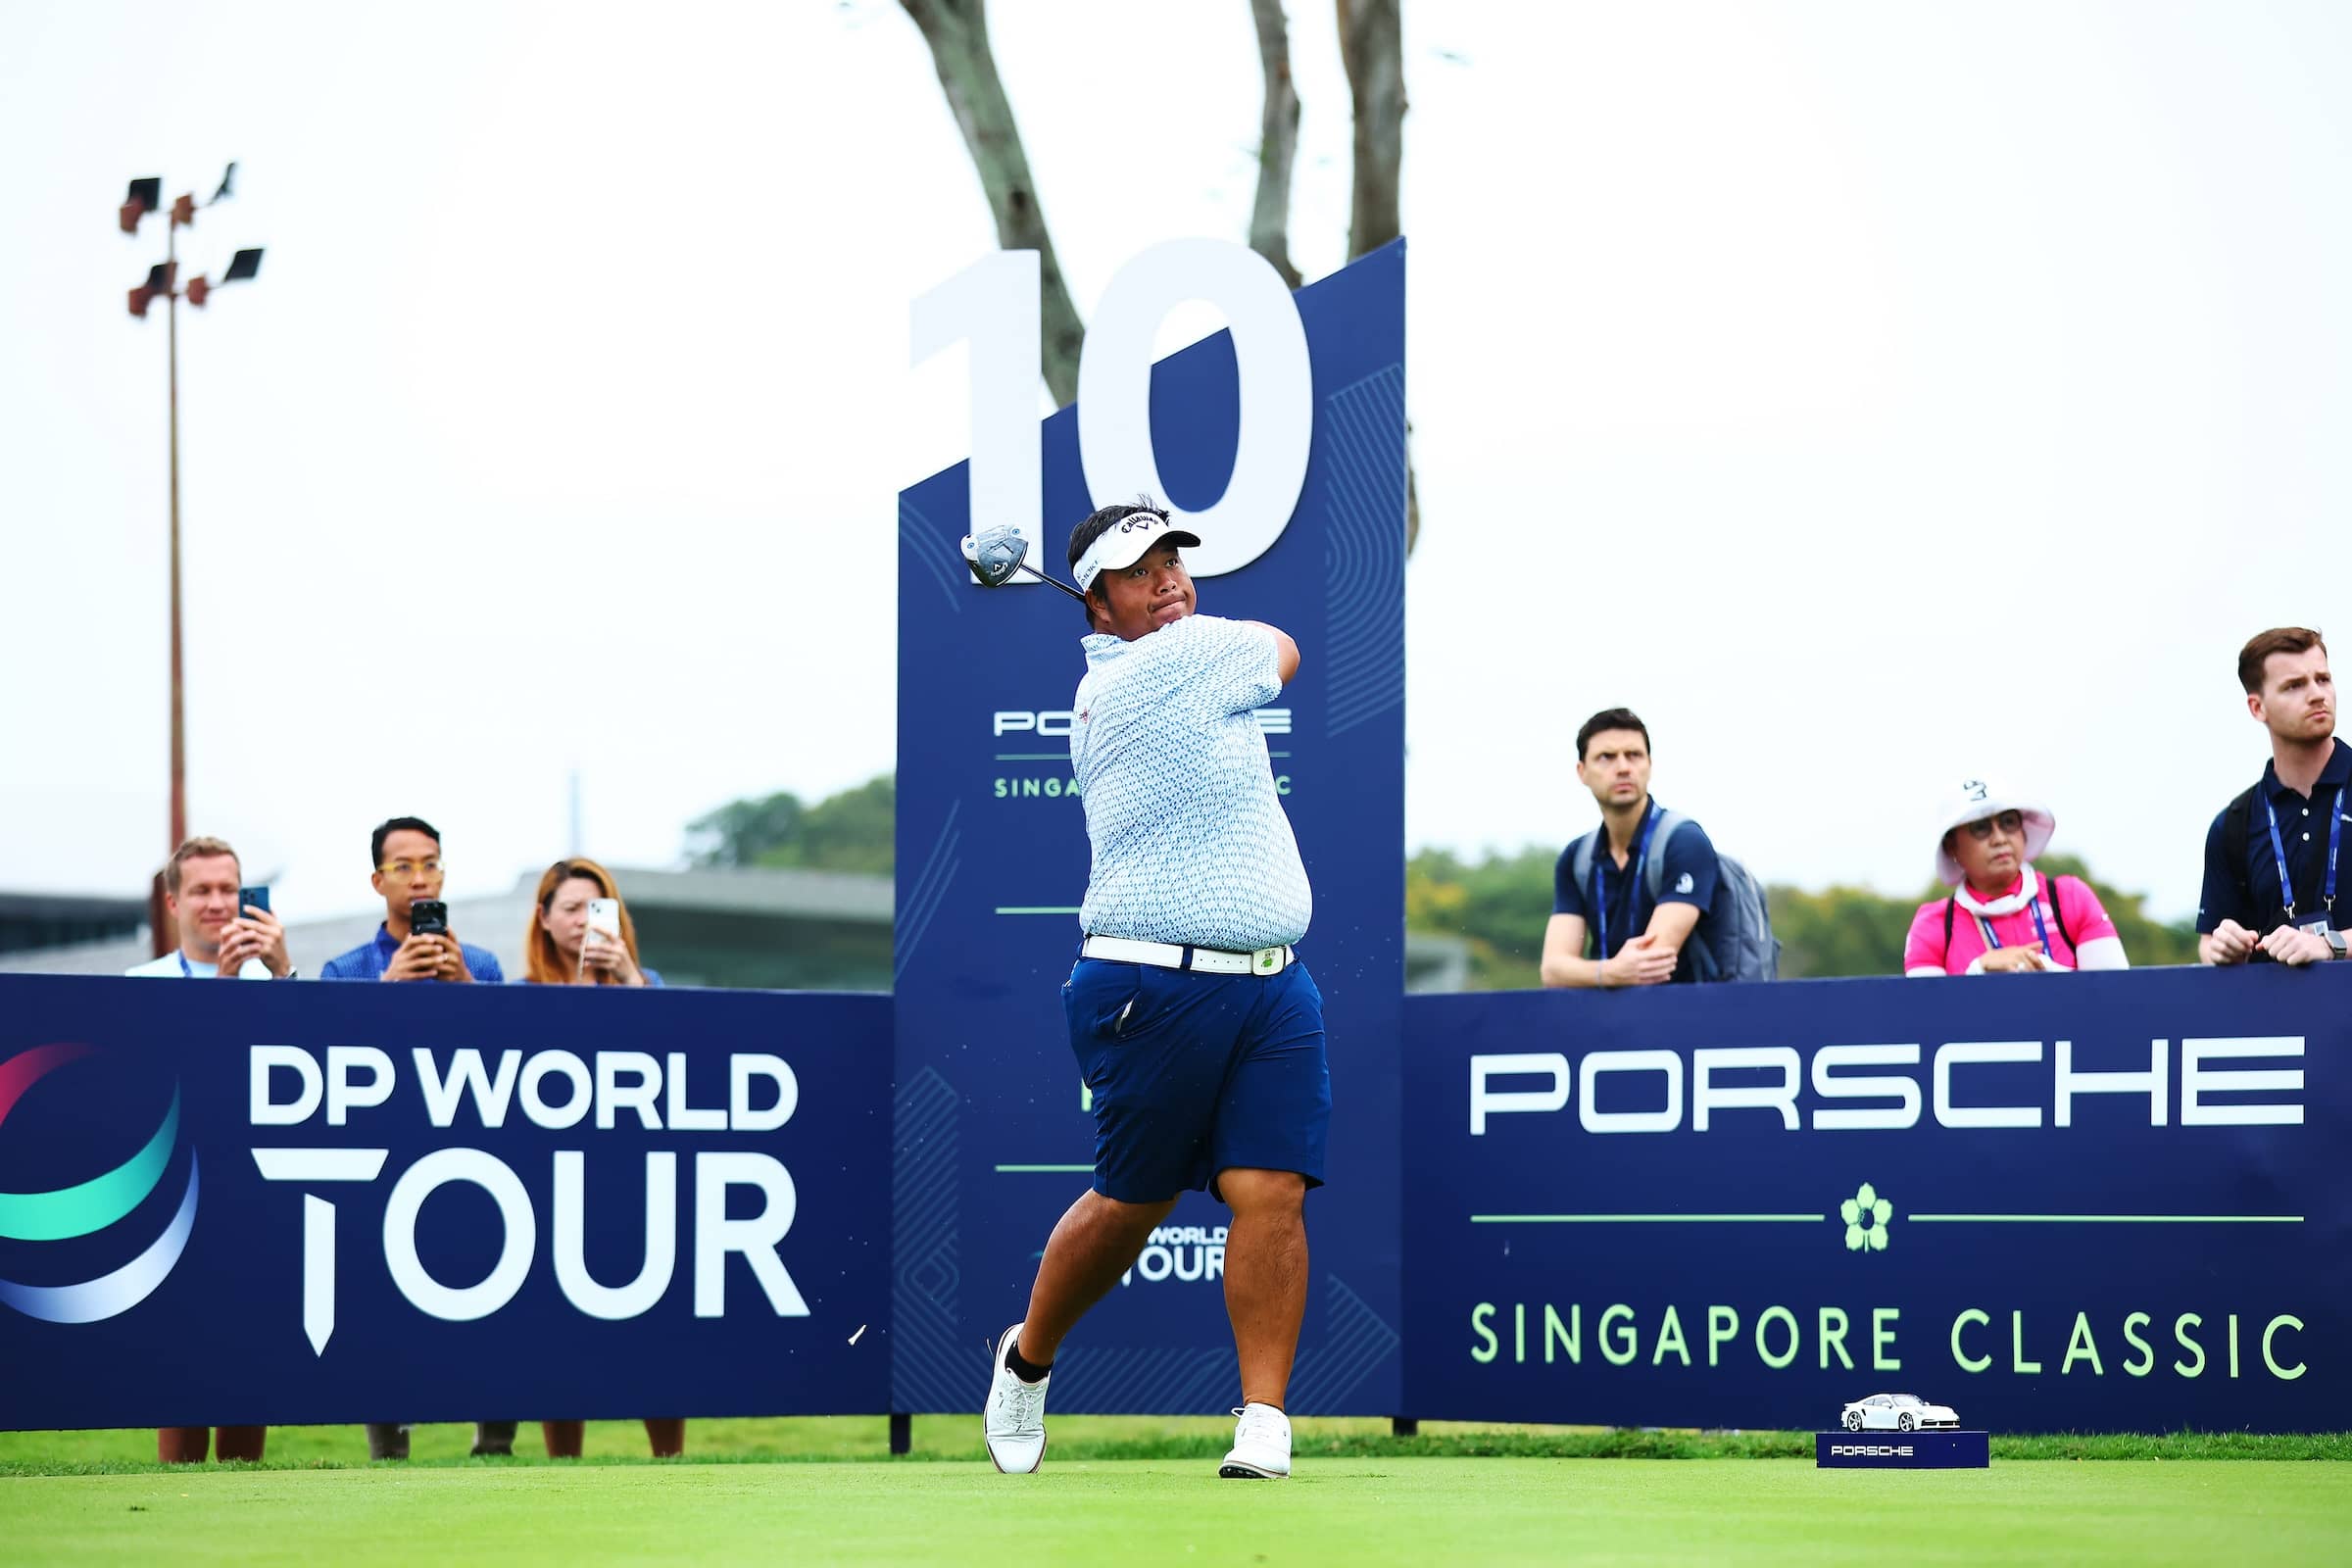 Breaking Down Aphibarnrat’s Performance: Key Moments In His Journey To The Top At The Porsche Singapore Classic